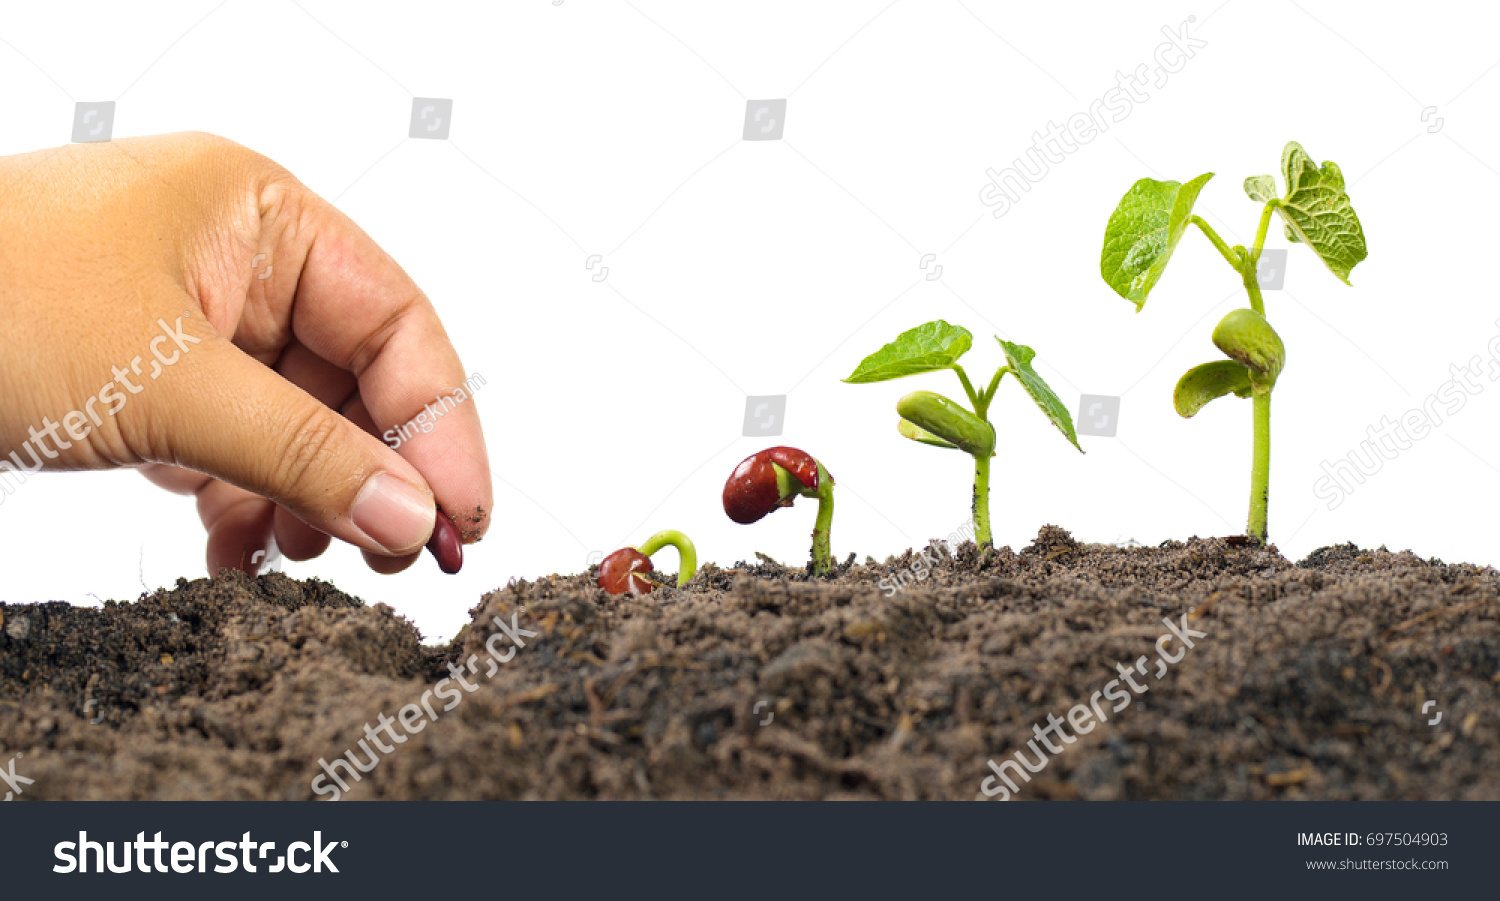 Agriculture and New life starting concept. Farmer hand seed planting with seed germination sequence over isolated on white background #697504903